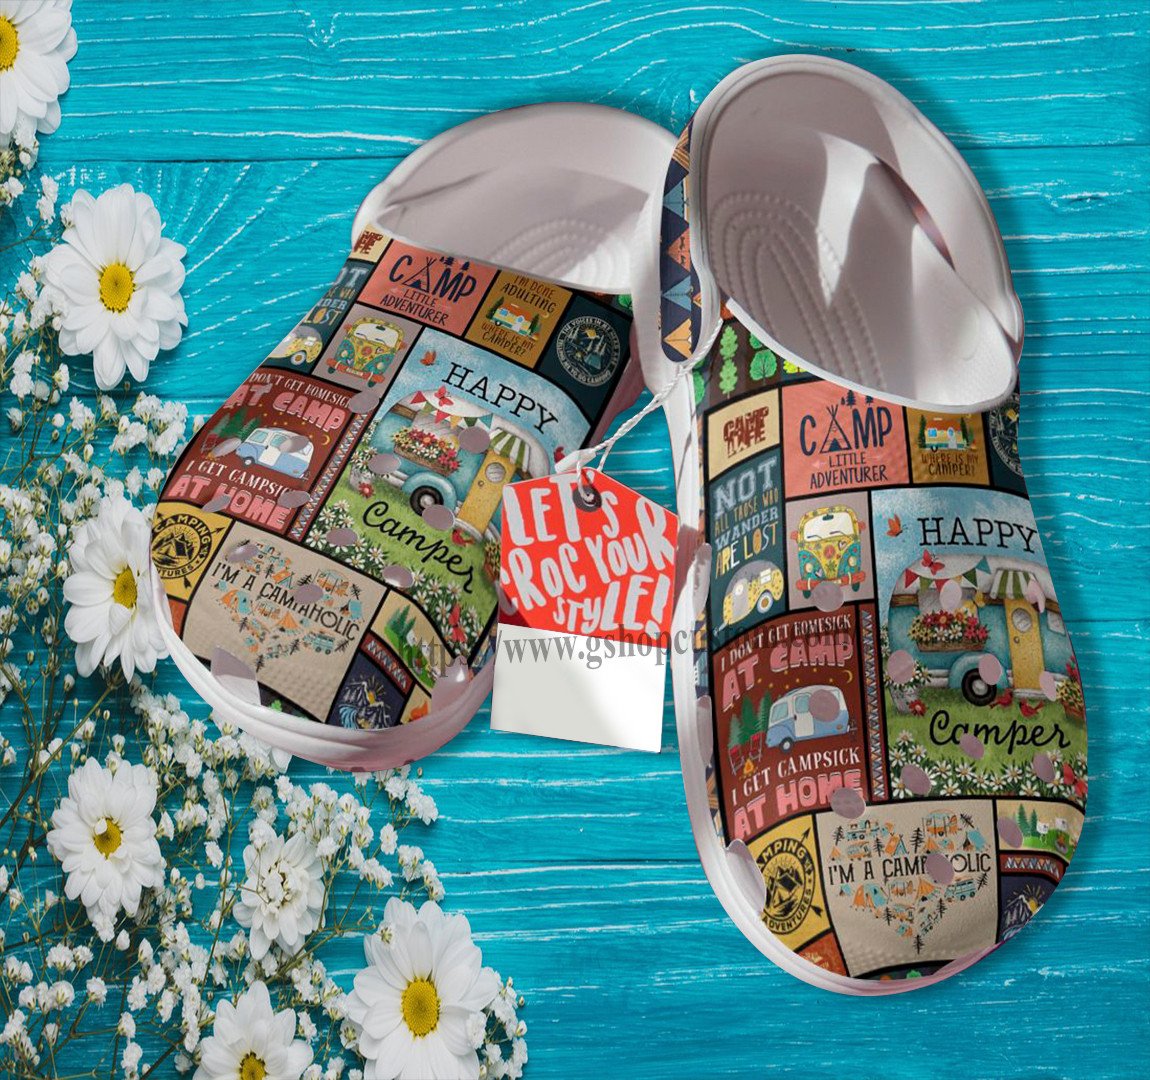 Happy Camper Sticker Croc Shoes Gift Niece- Hippie Camping Banner Shoes Croc Clogs Gift Grandaughter- Cr-Ne0368